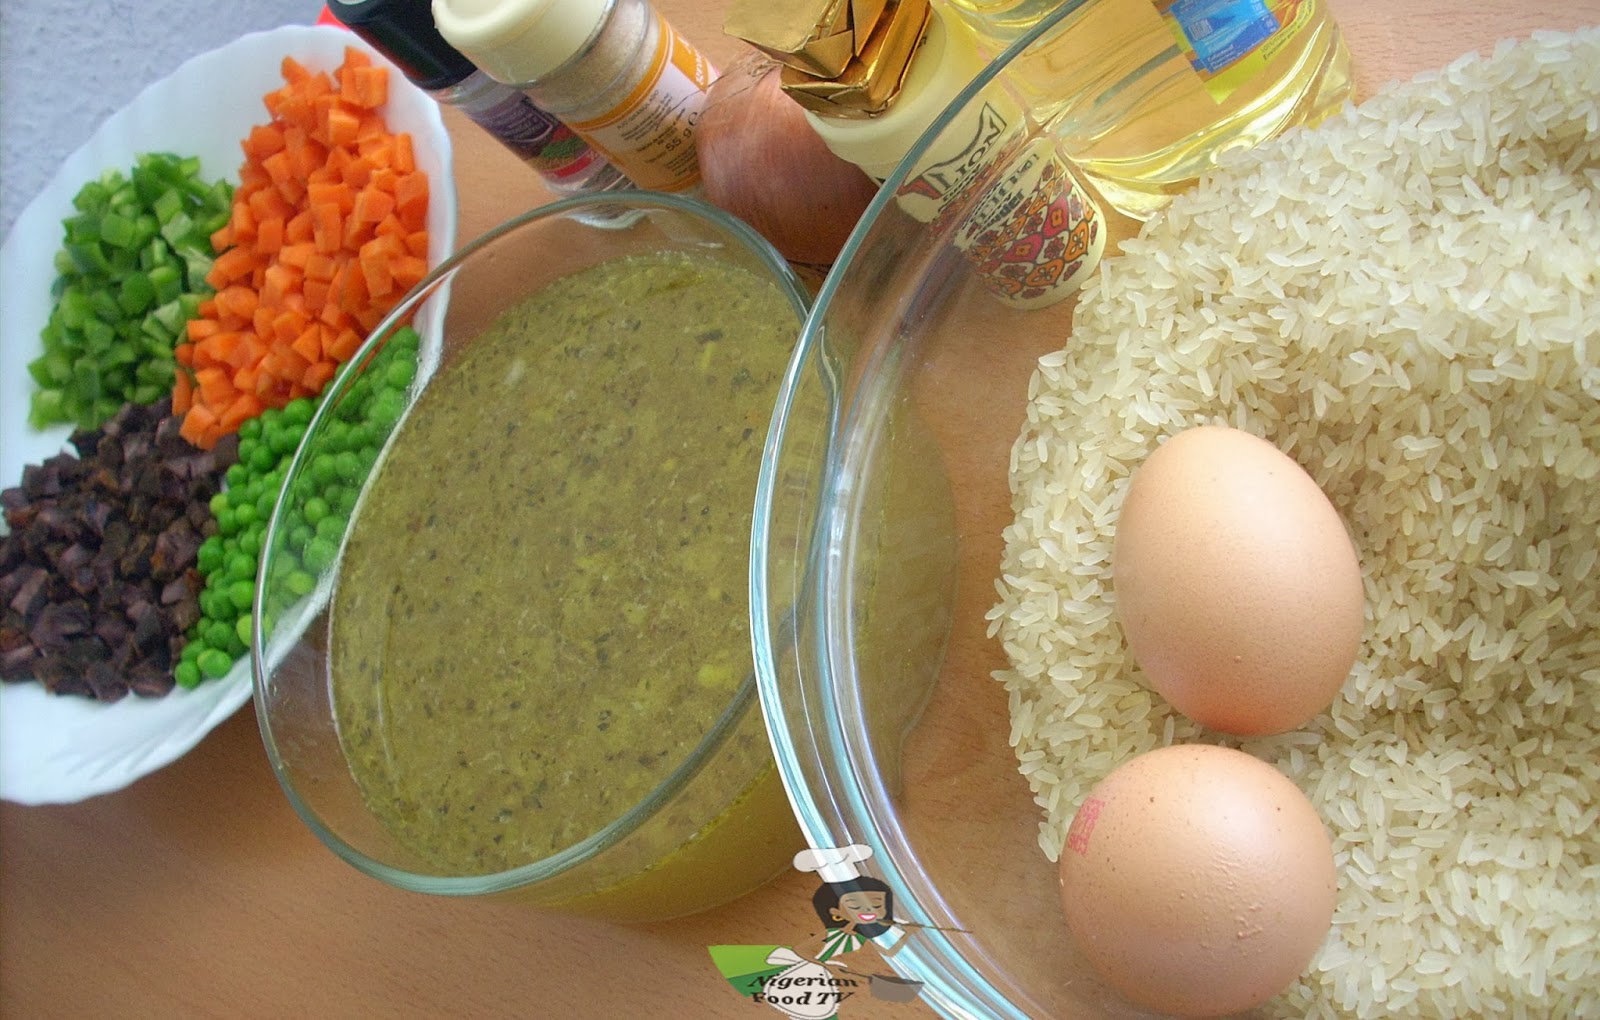  ingredients for Nigerian Egg Fried Rice 